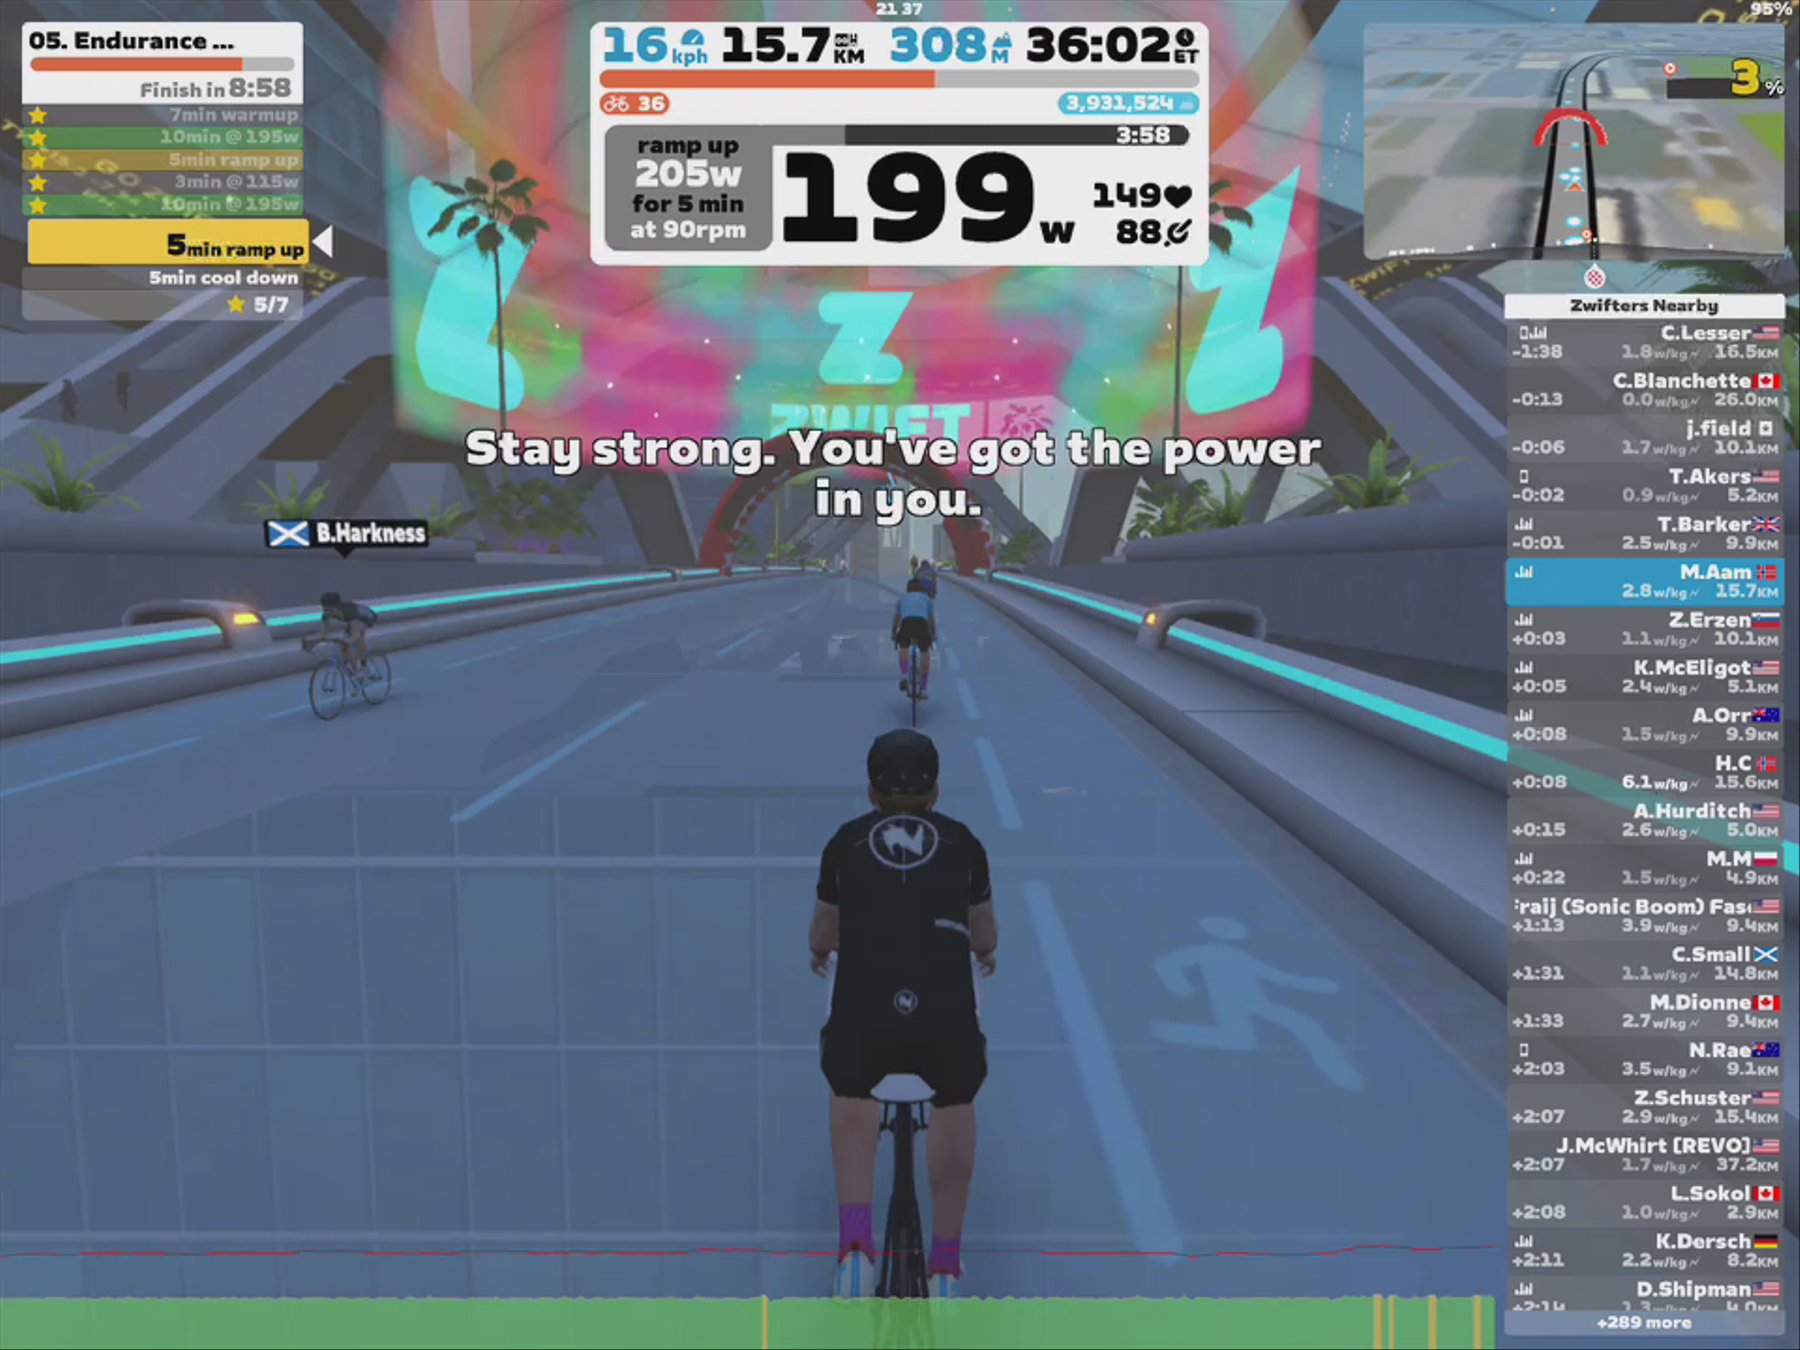 Zwift - 05. Endurance Ascent in New York